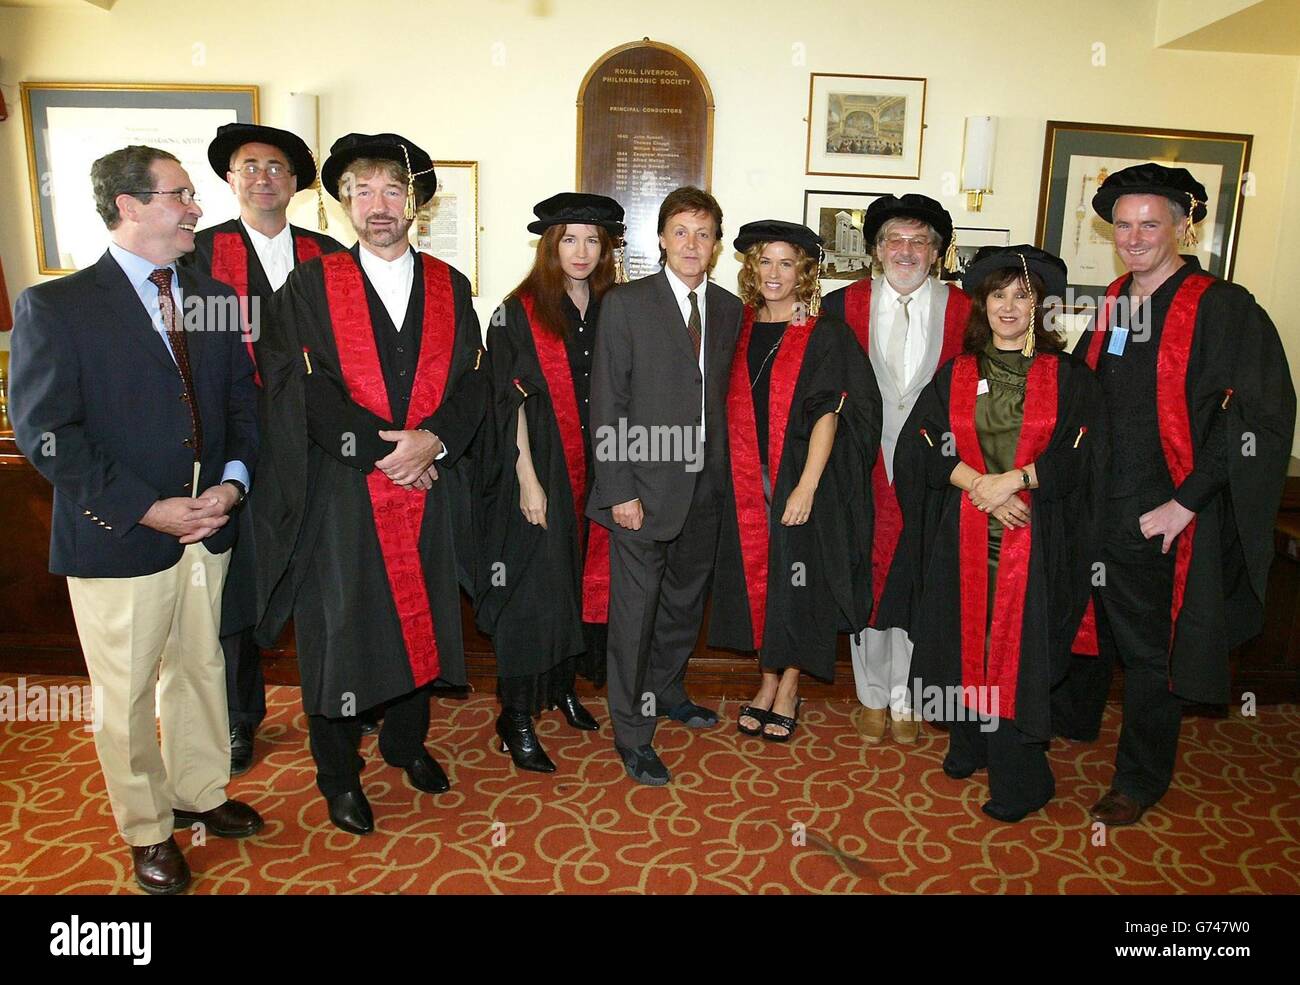 Sir Paul McCartney with two members of the band The Bangles, Vicki Peterson (right) and Michael Steele, with (left-right in gowns) Ken Campbell, Tim Firth, Terry Marshall, Arlene Phillips, Willy Russell and Jon Webster, who where made companions of the Liverpool Institute for Performing Arts during a ceremony, at The Liverpool Philharmonic Hall, for thier contribution to arts and entertainment and for sharing expertise with LIPA students. Stock Photo